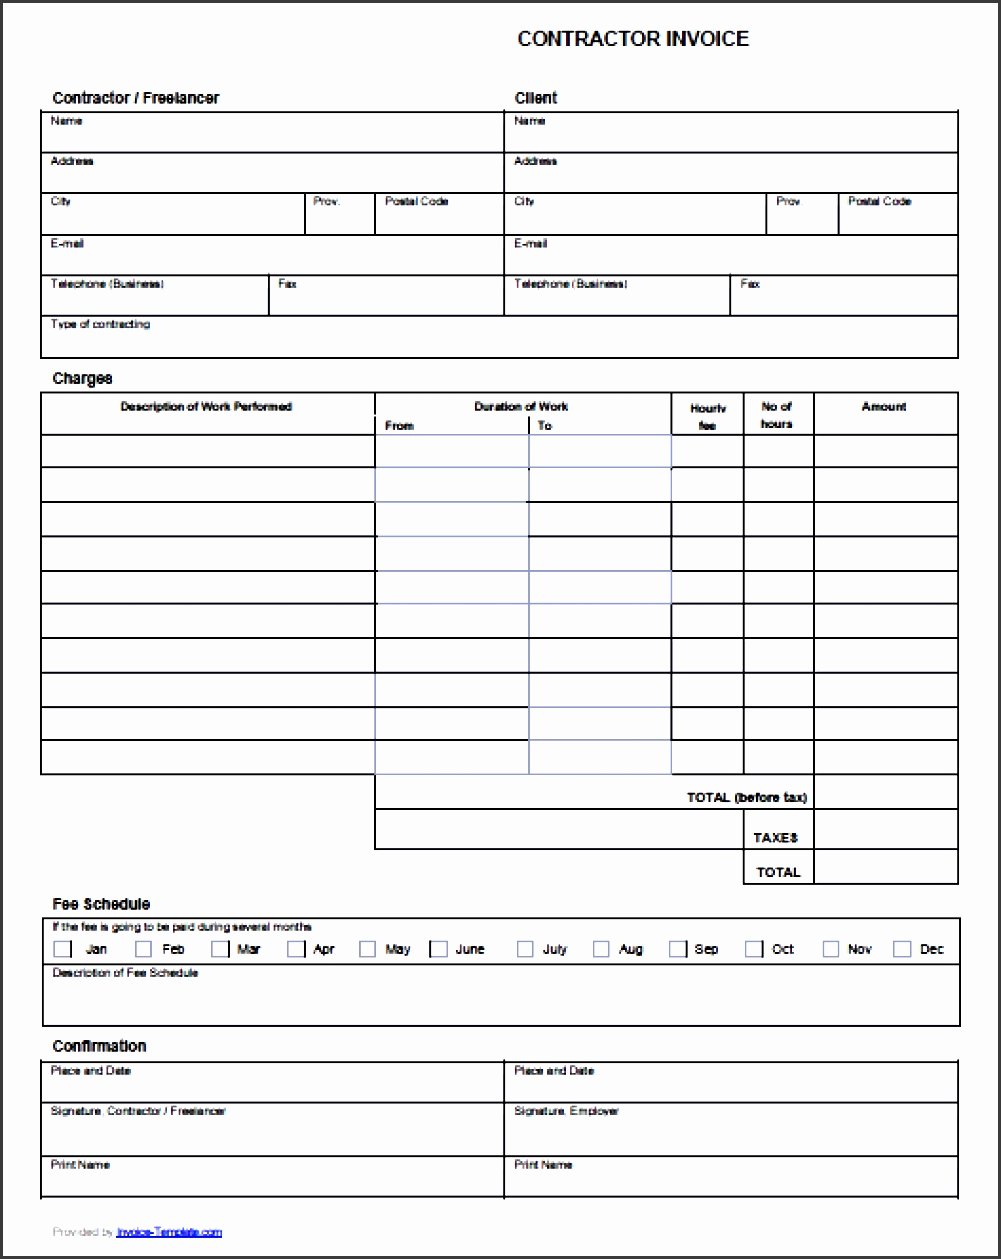 Contractor Invoice Template Excel Fresh Contractor Invoice Template Free Excel Archives